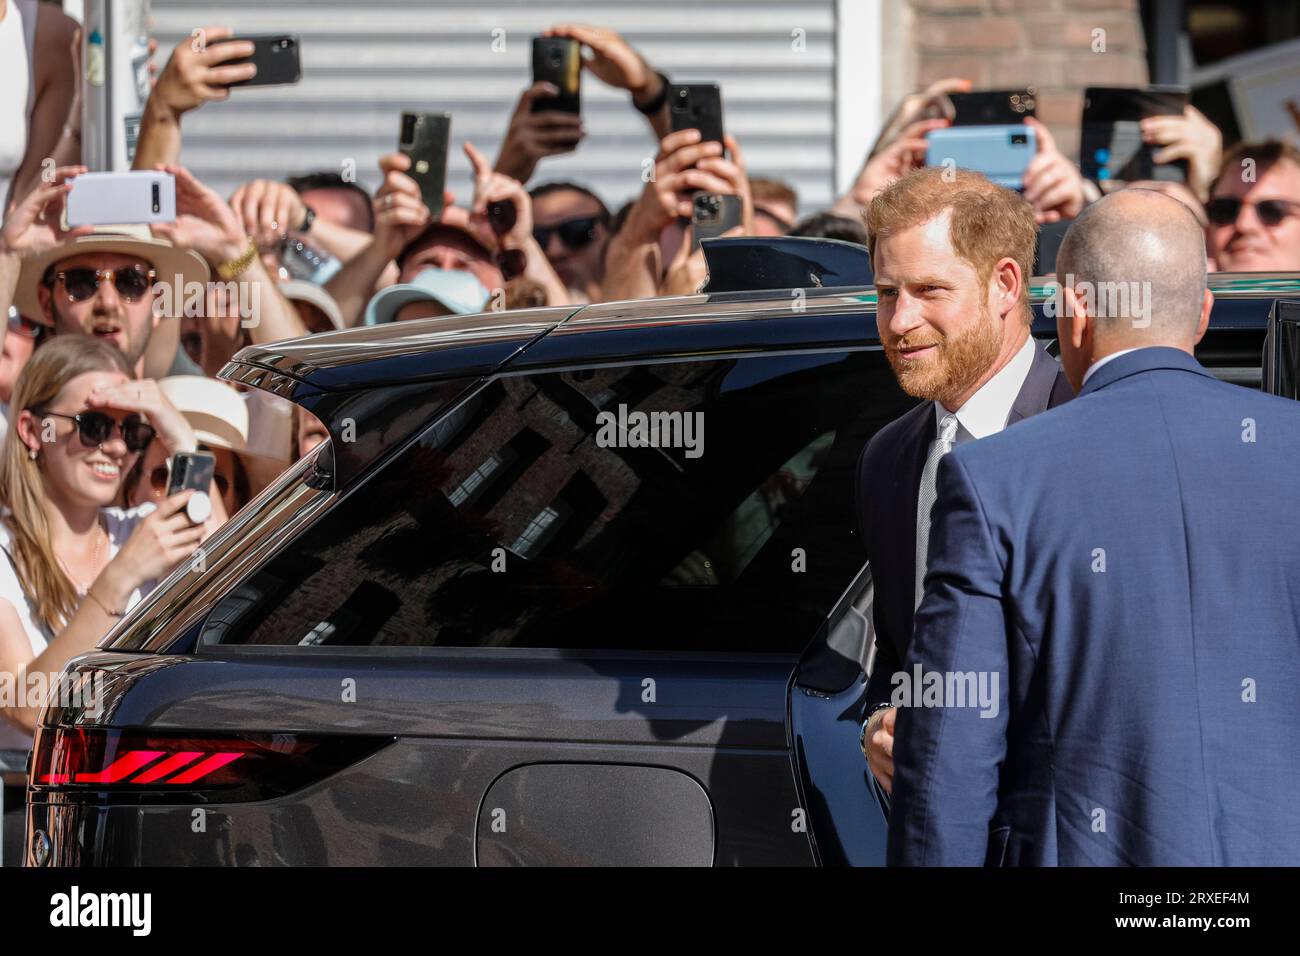 Prince Harry, the Duke of Sussex greeted by the public outside Düsseldorf City HalI Iknvictus Games reception, Germany Stock Photo